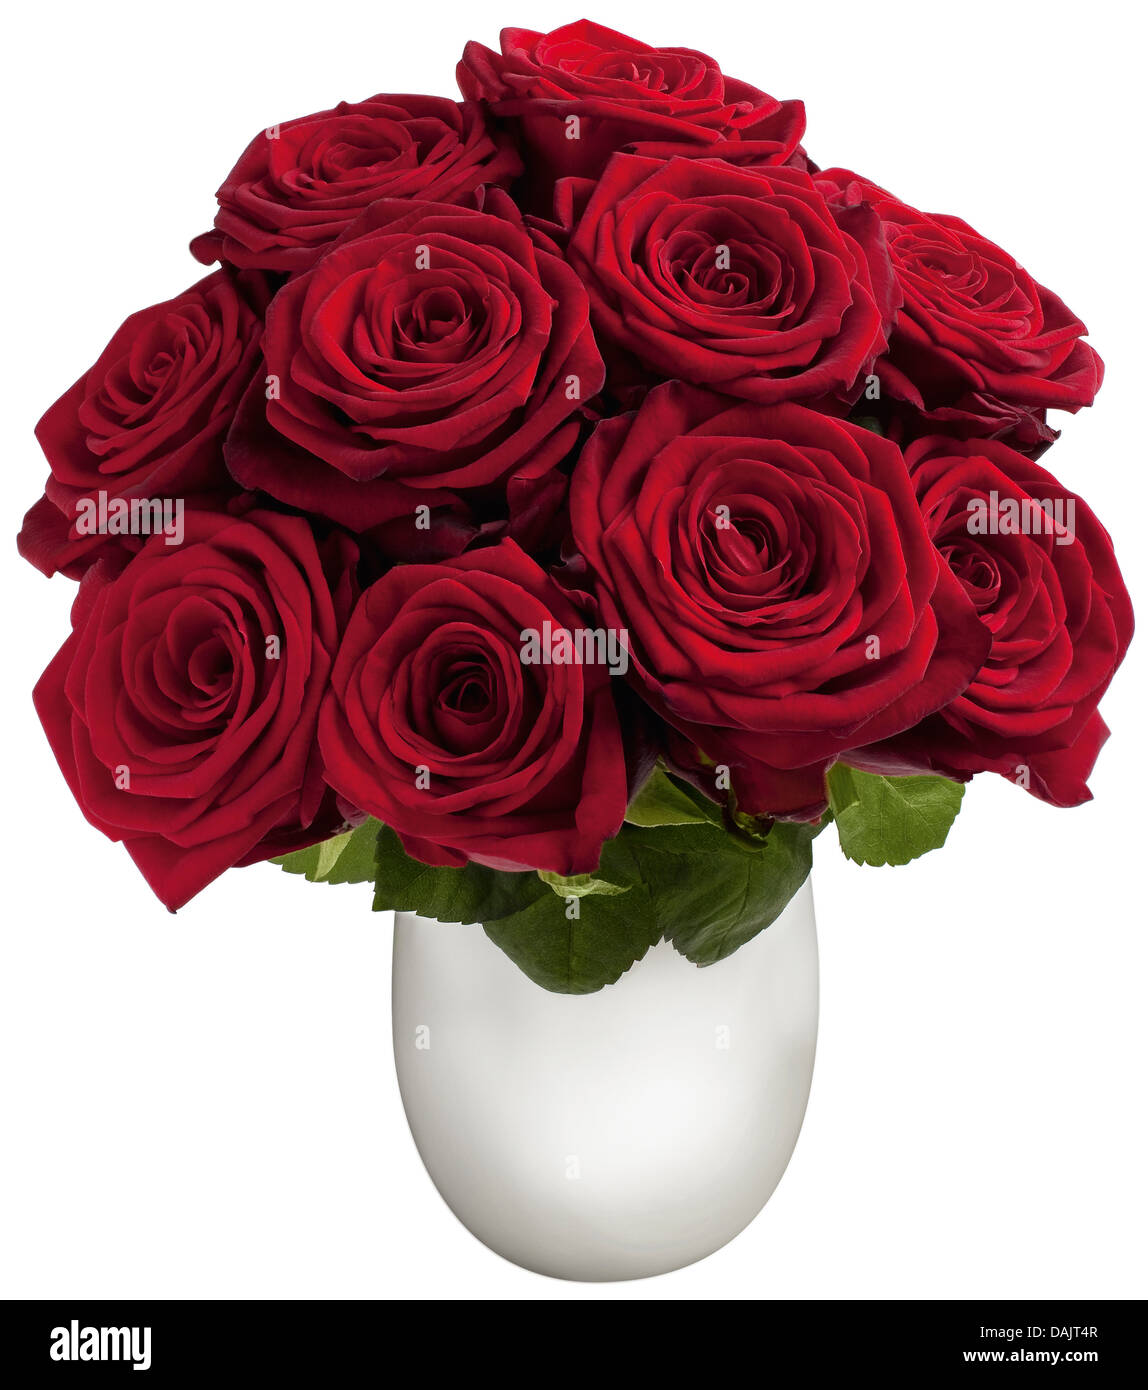 Red roses in flower vase on white background, close up Stock Photo - Alamy